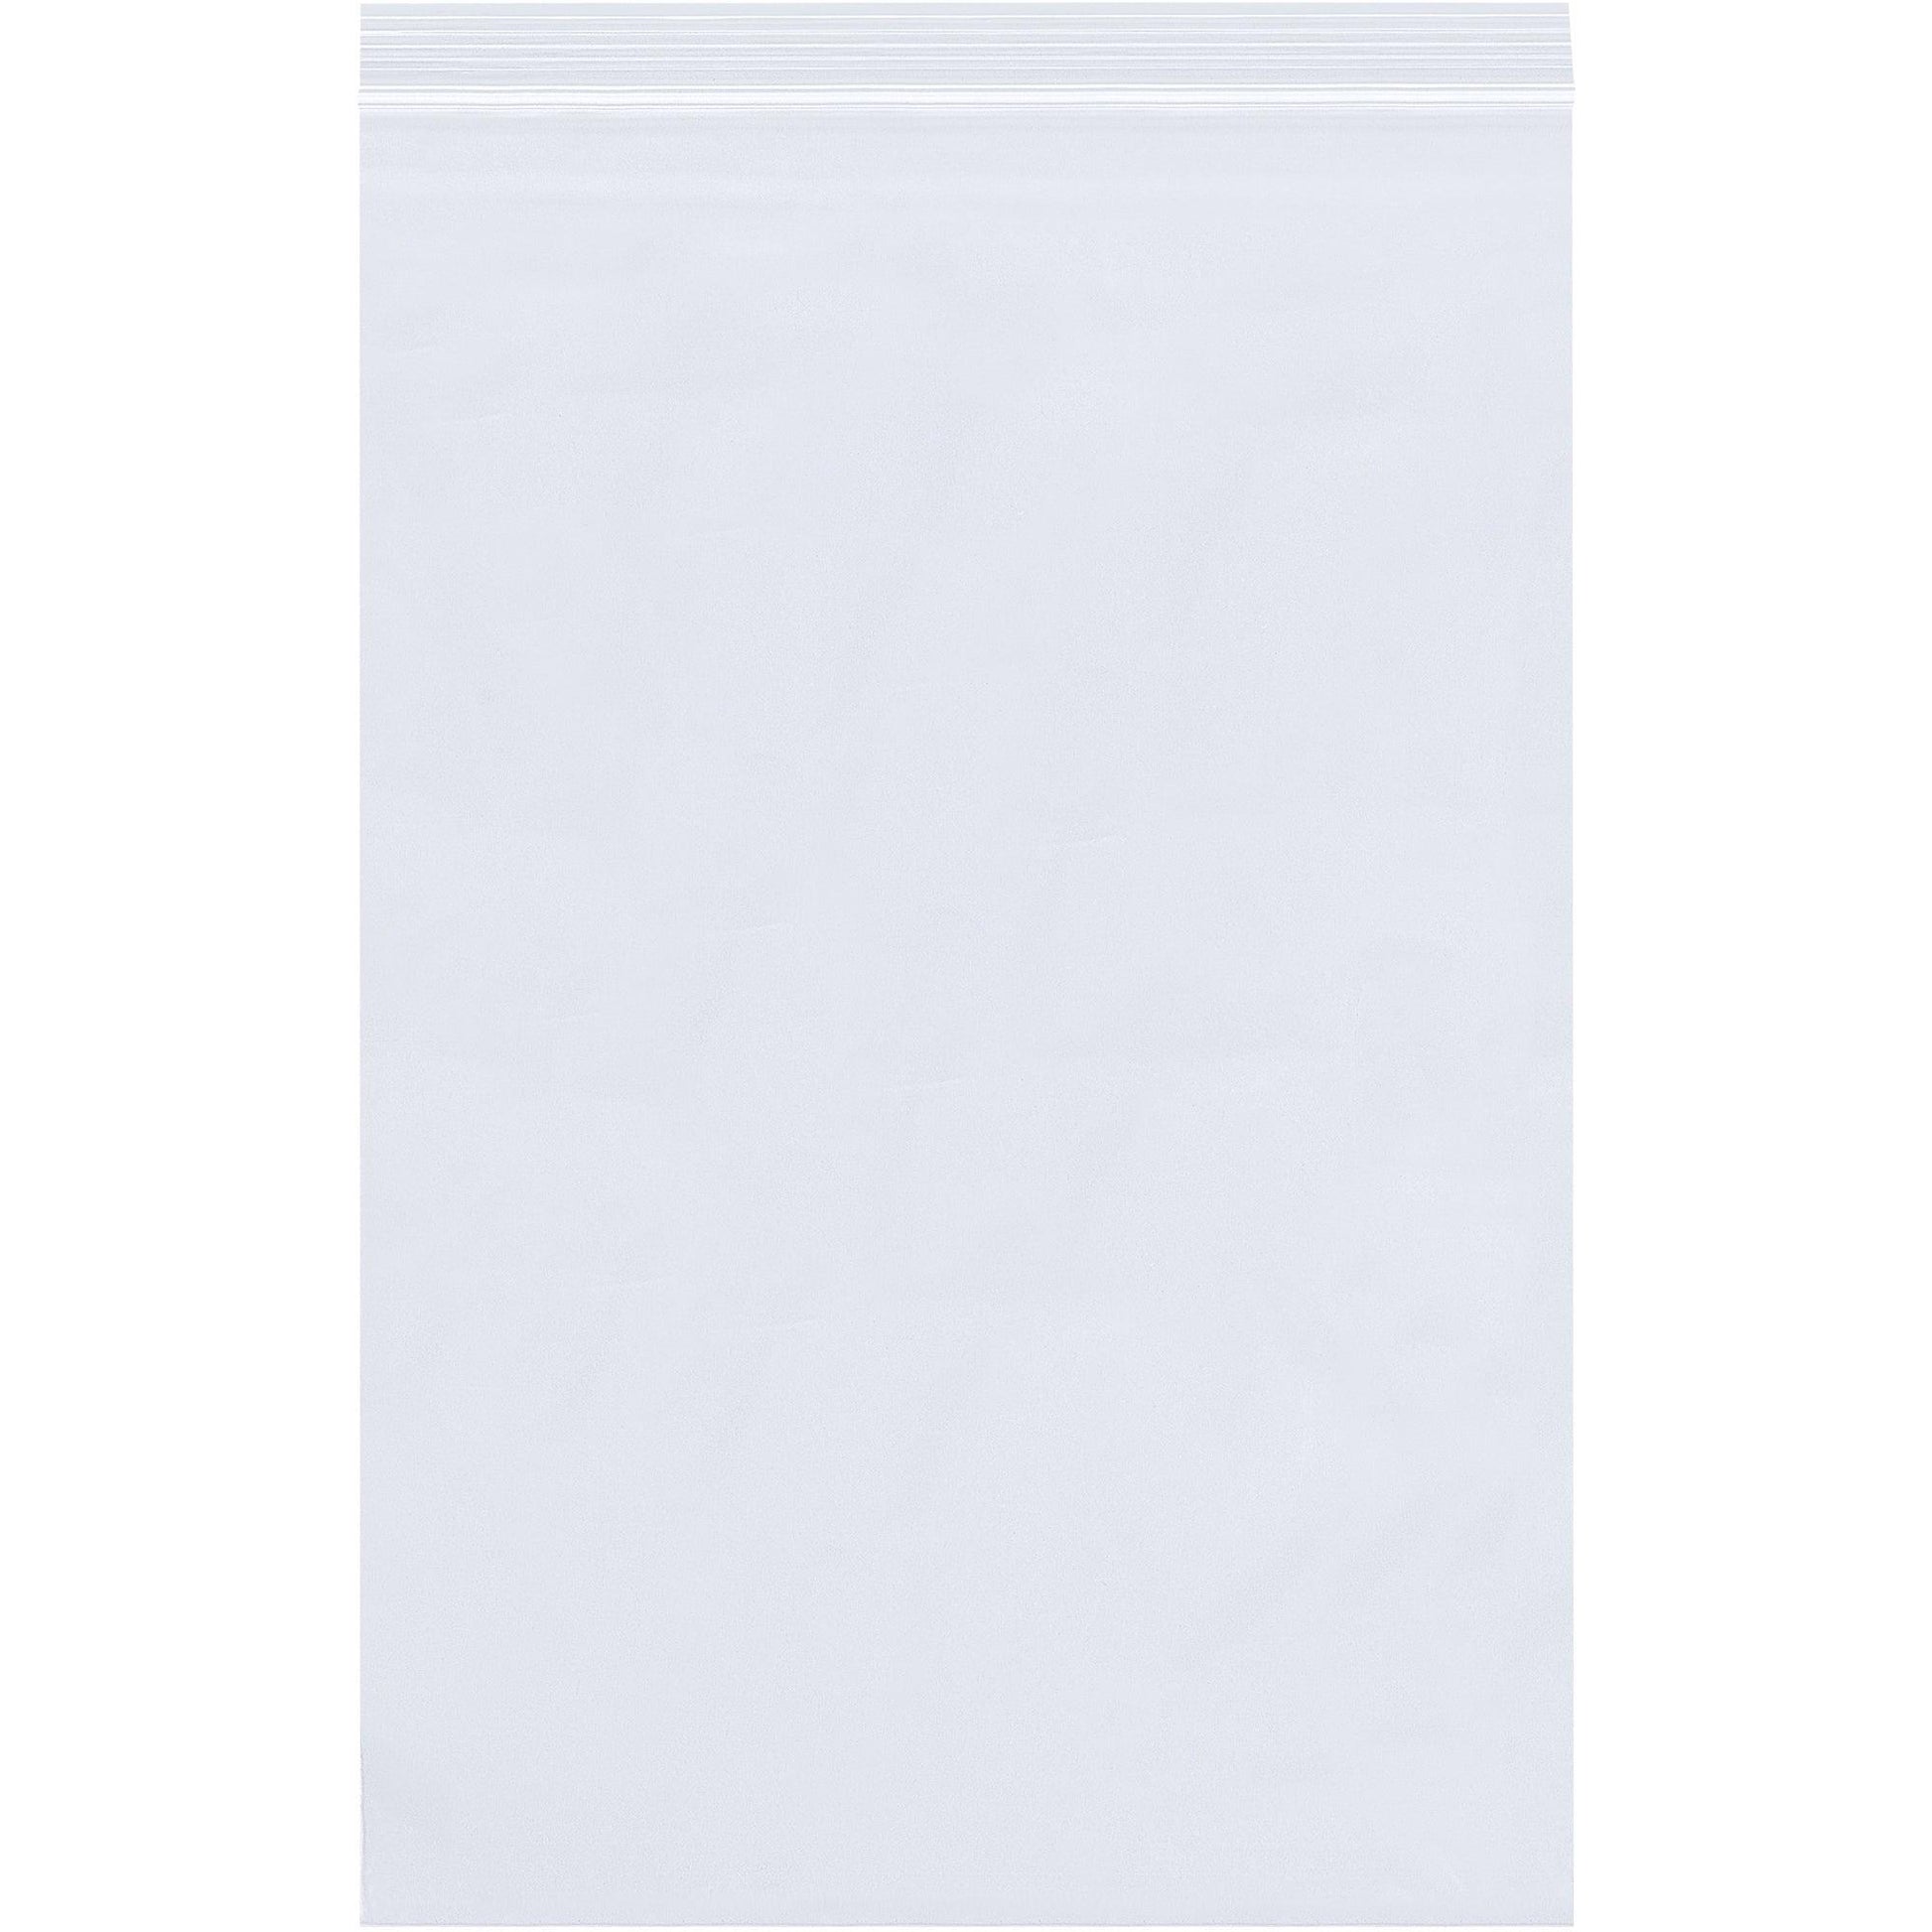 5 x 7" - 2 Mil Reclosable Poly Bags - PB3580